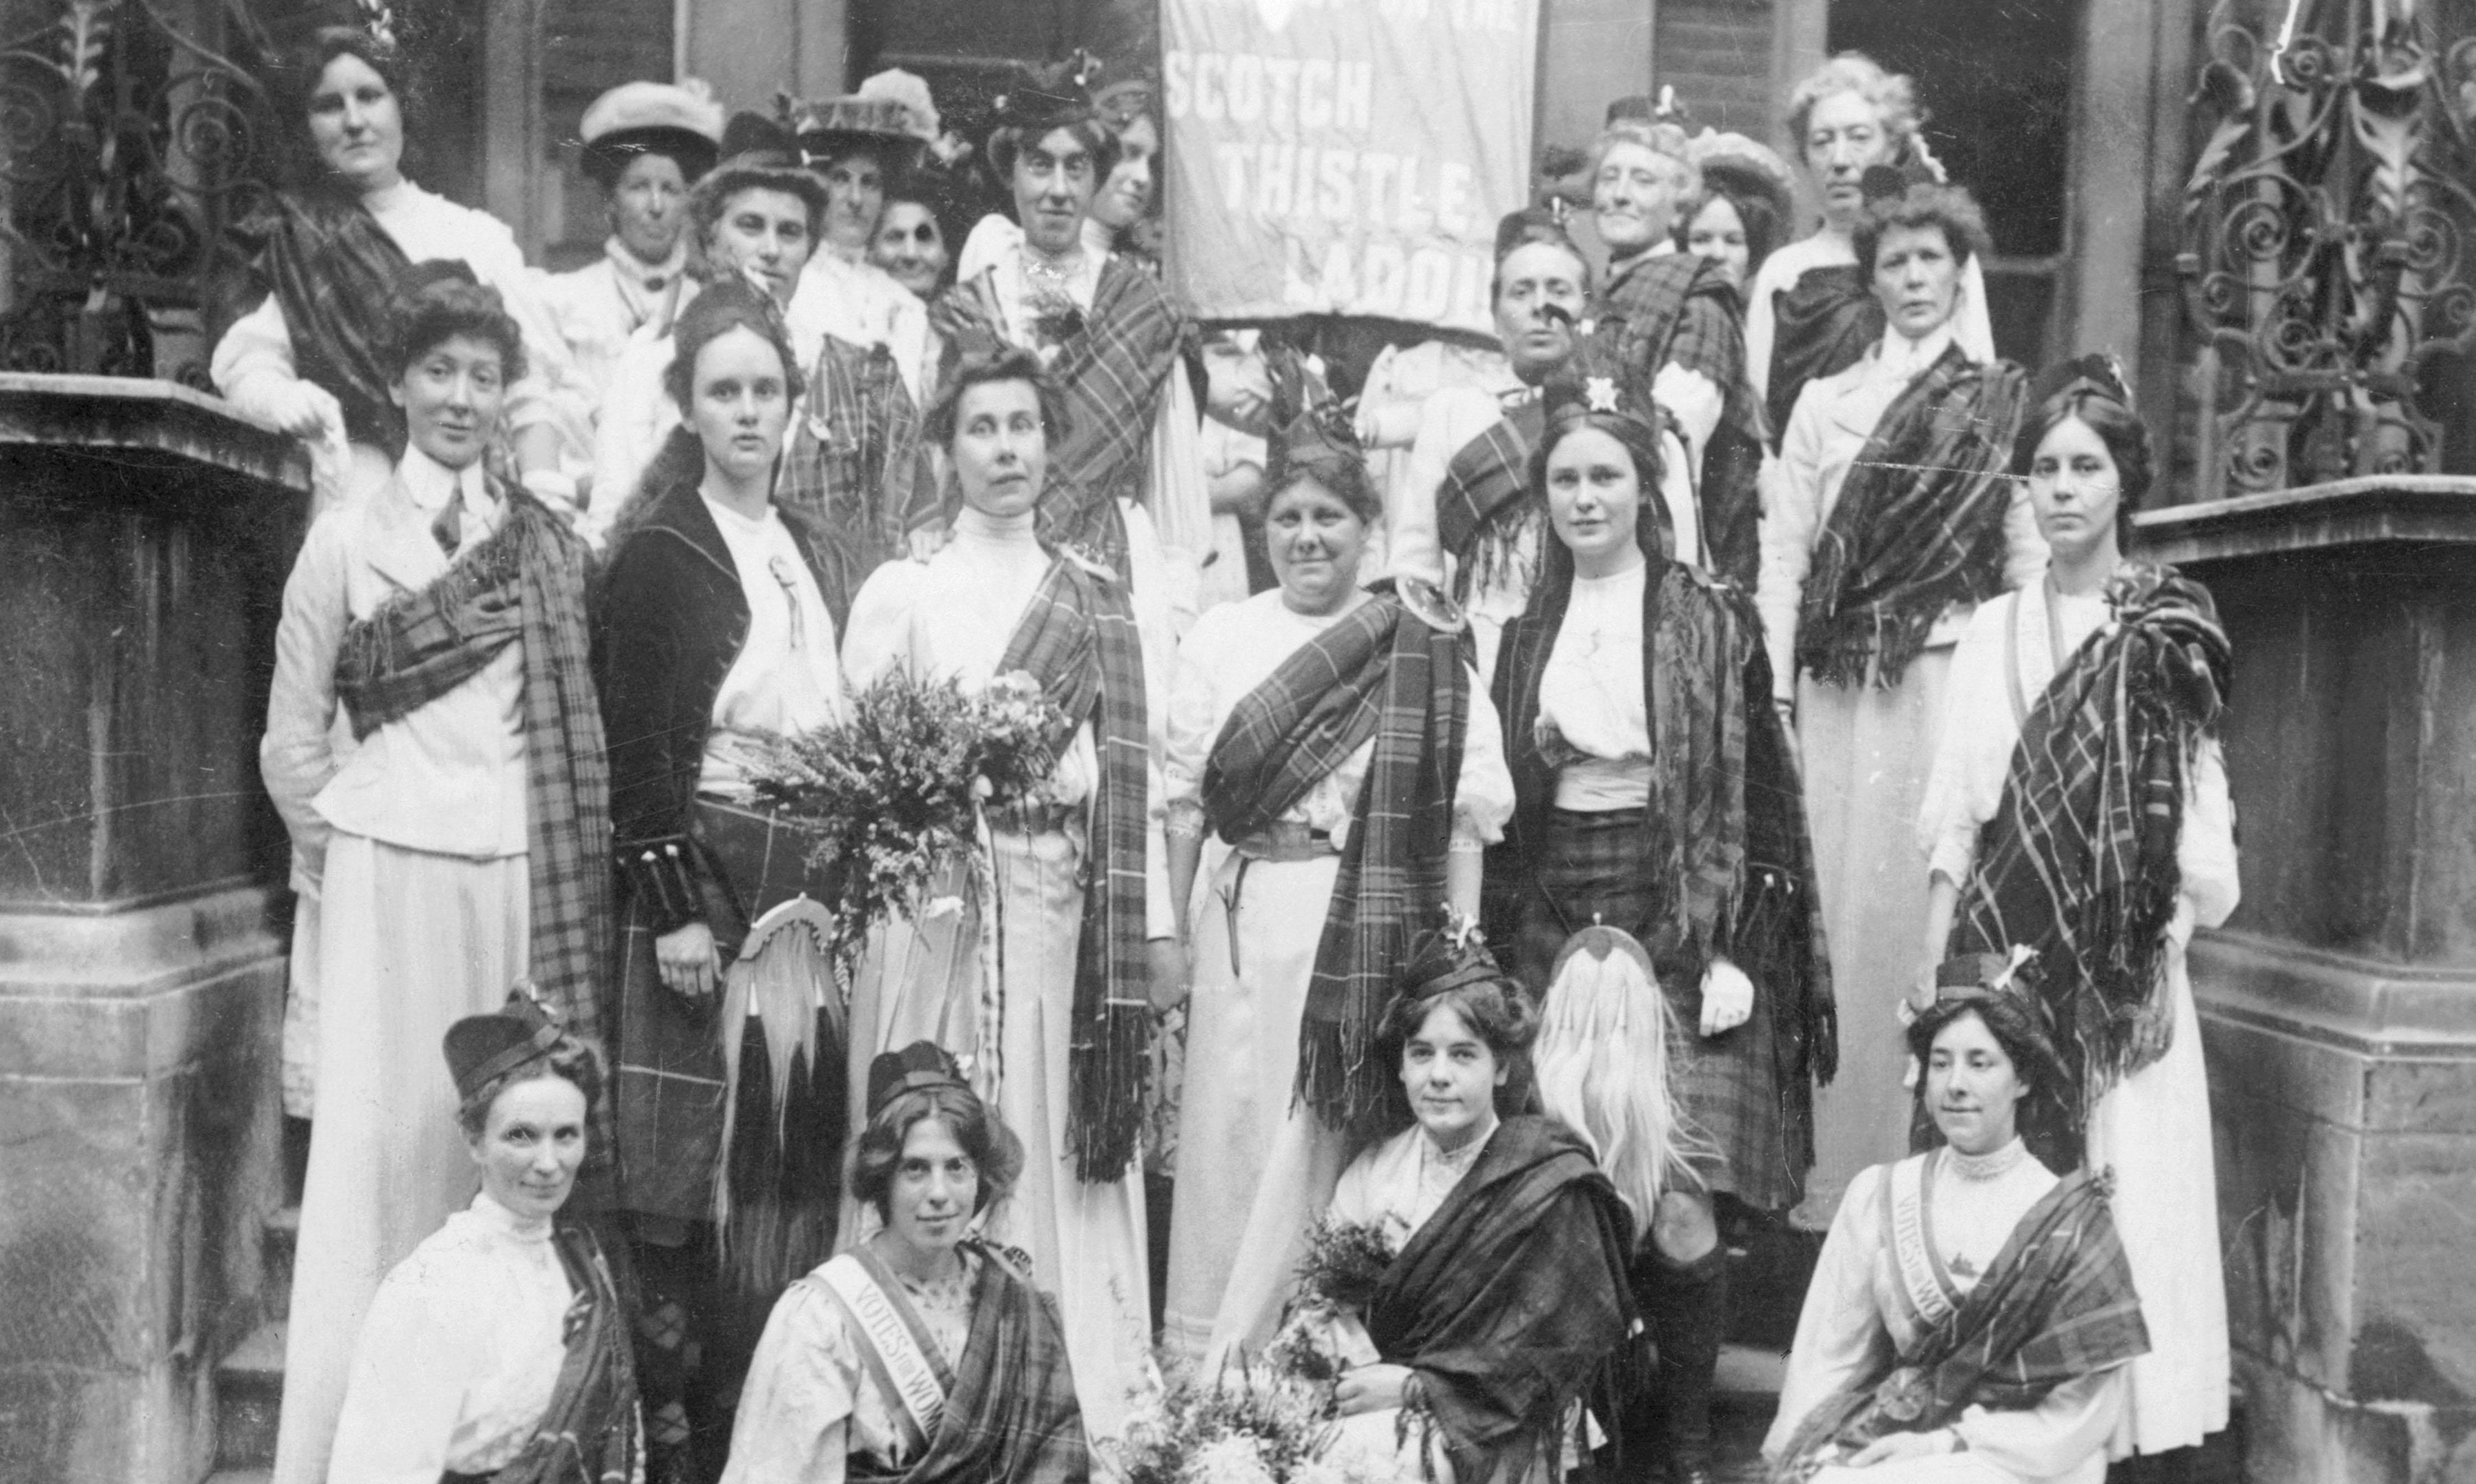 Scottish suffragettes welcome Mary Phillips, standing third from left, after she is freed from Holloway prison in London in August 1908 (Heritage Image Partnership Ltd)